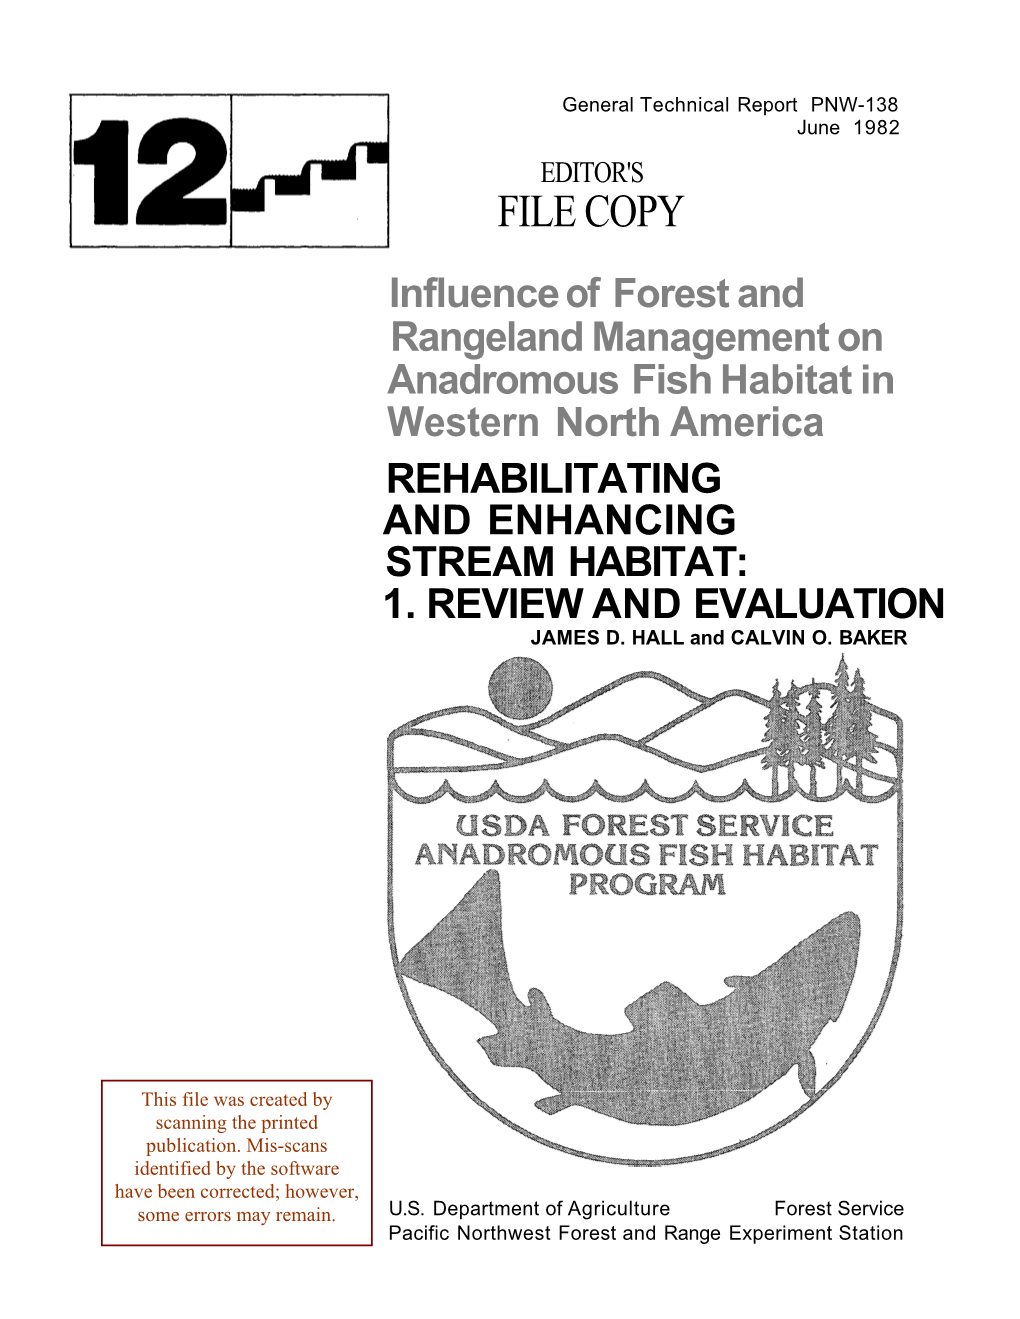 FILE COPY Influence of Forest and Rangeland Management on Anadromous Fish Habitat in Western North America REHABILITATING and ENHANCING STREAM HABITAT: 1